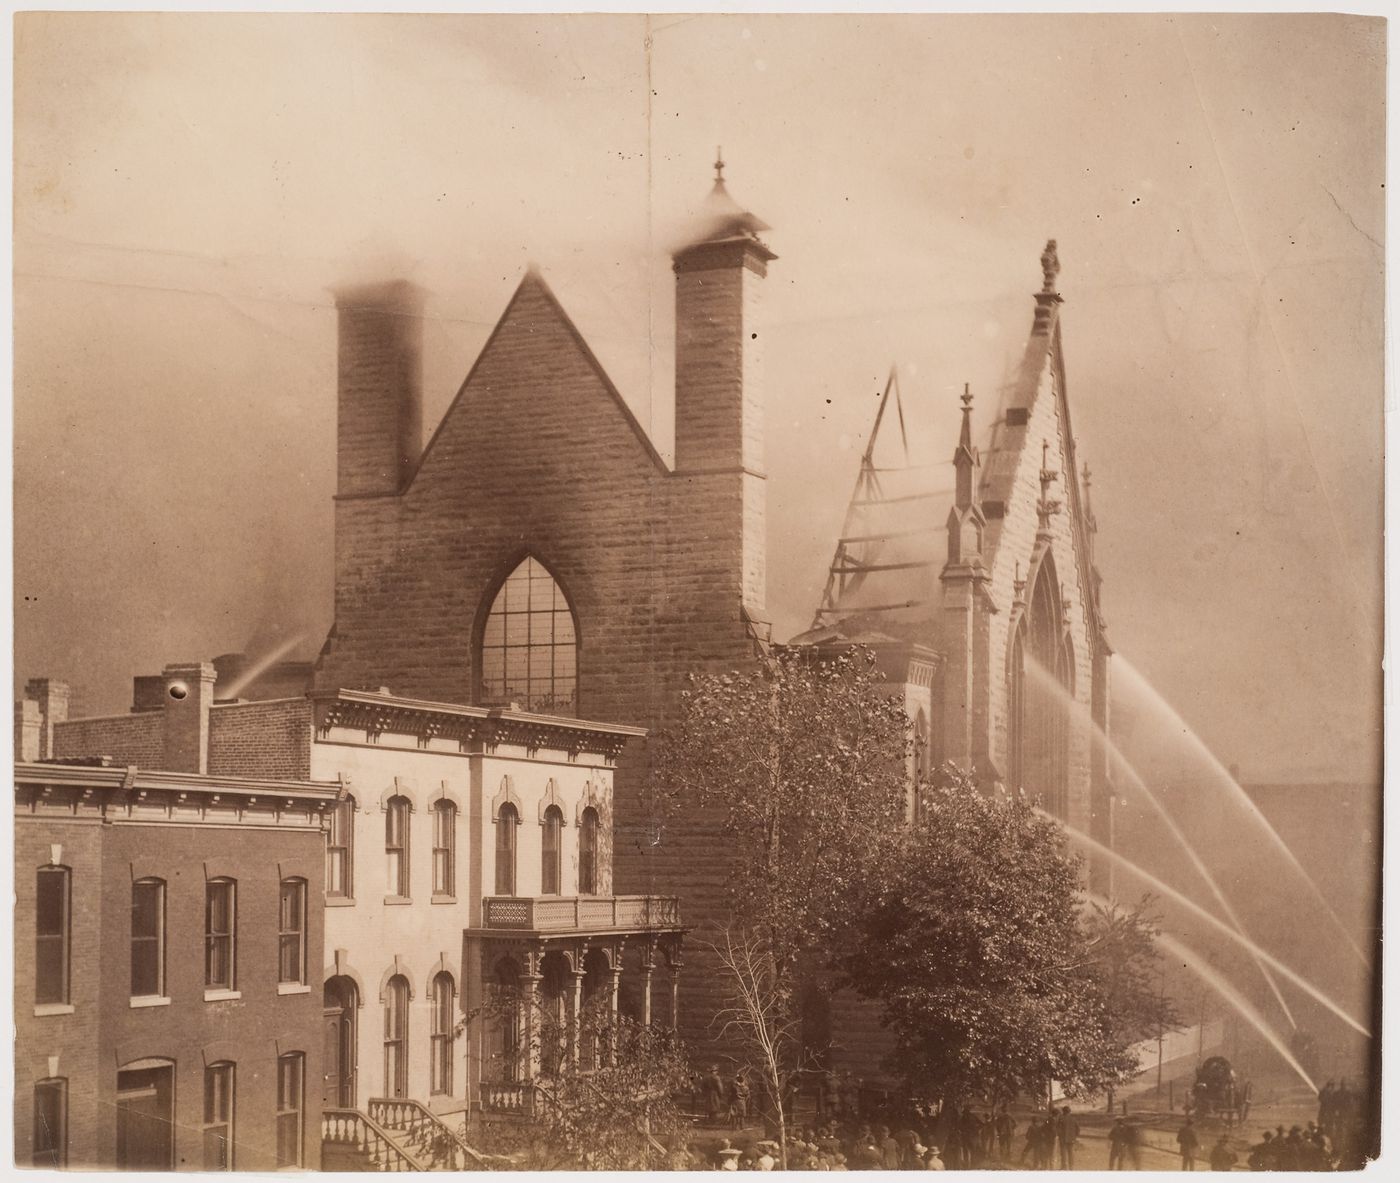 View of unidentified church on fire, Chicago, Illinois